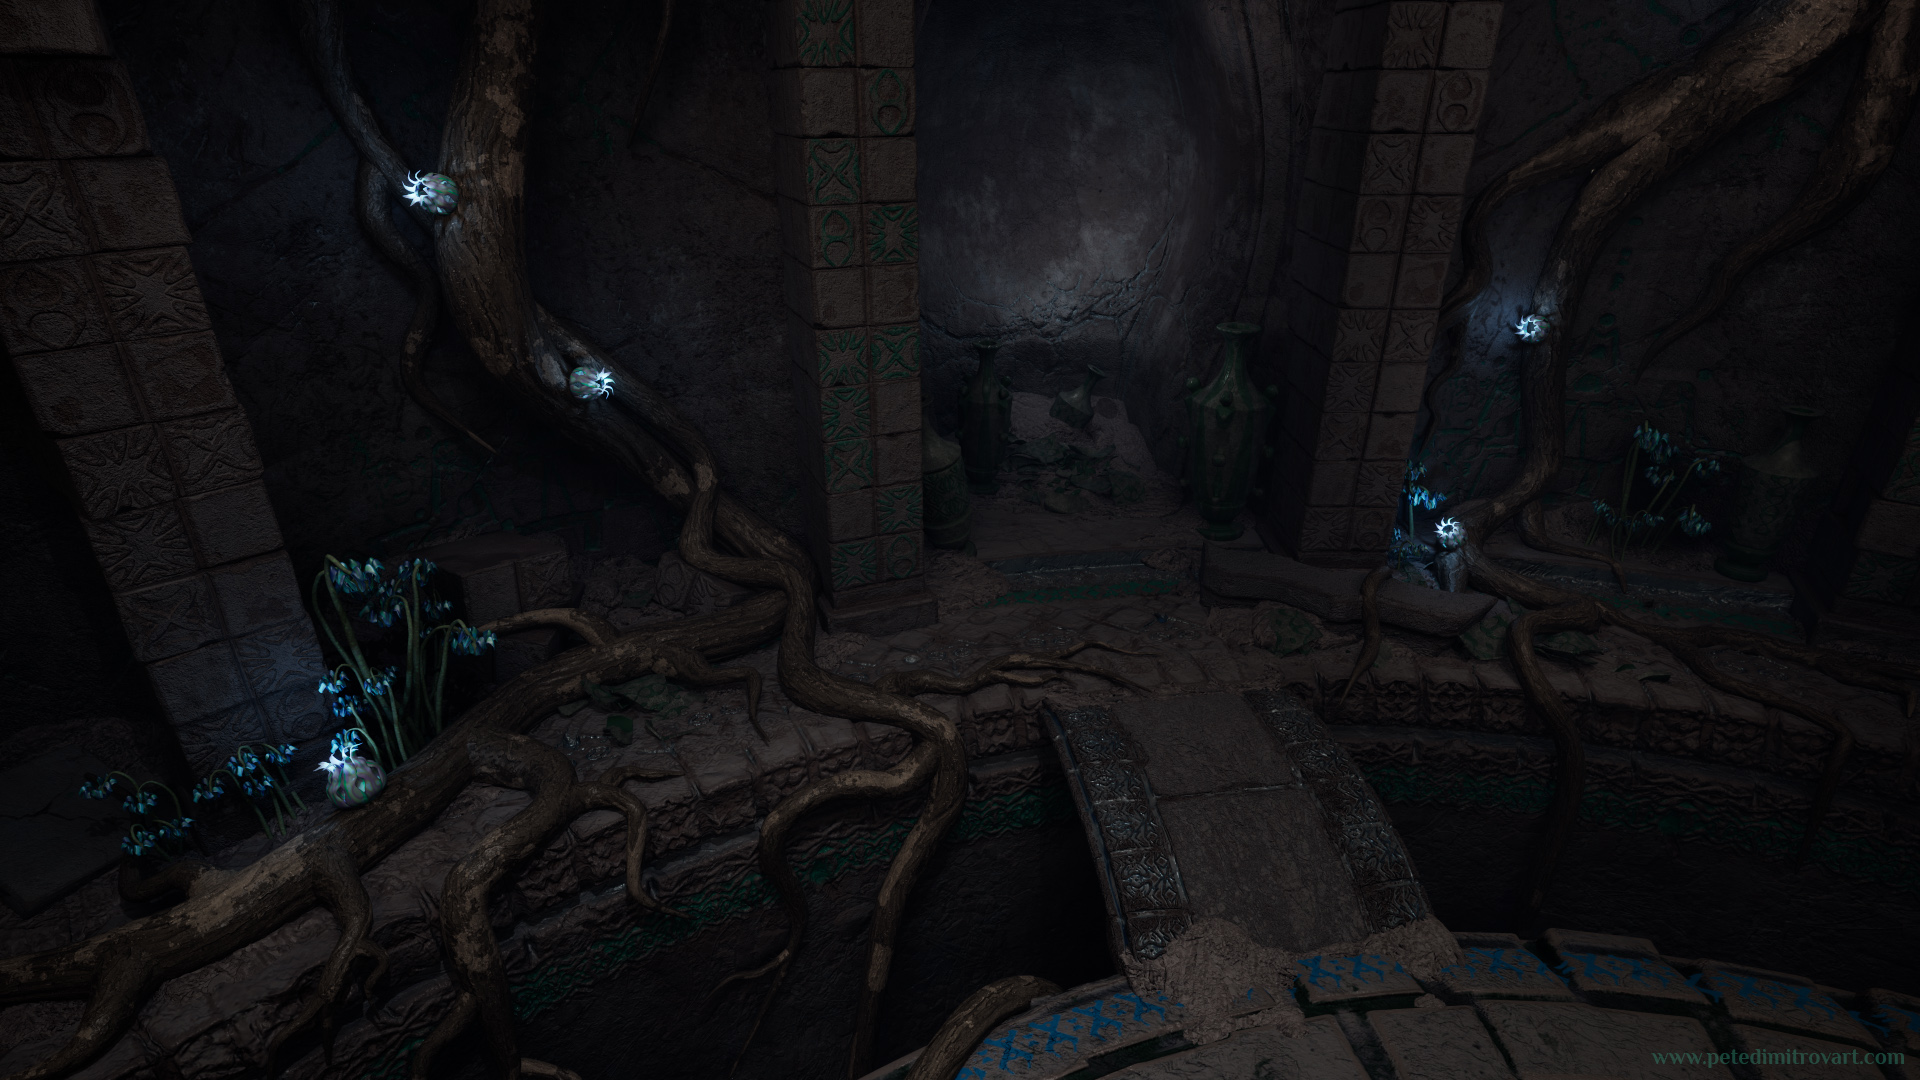 Shot identical to above. The at first empty spaces are now filled with roots that slither in all directions. The roots now have textures of barks too. There are flower foliage assets that have blue blooms and light up the scene in a magical, eerie glow.